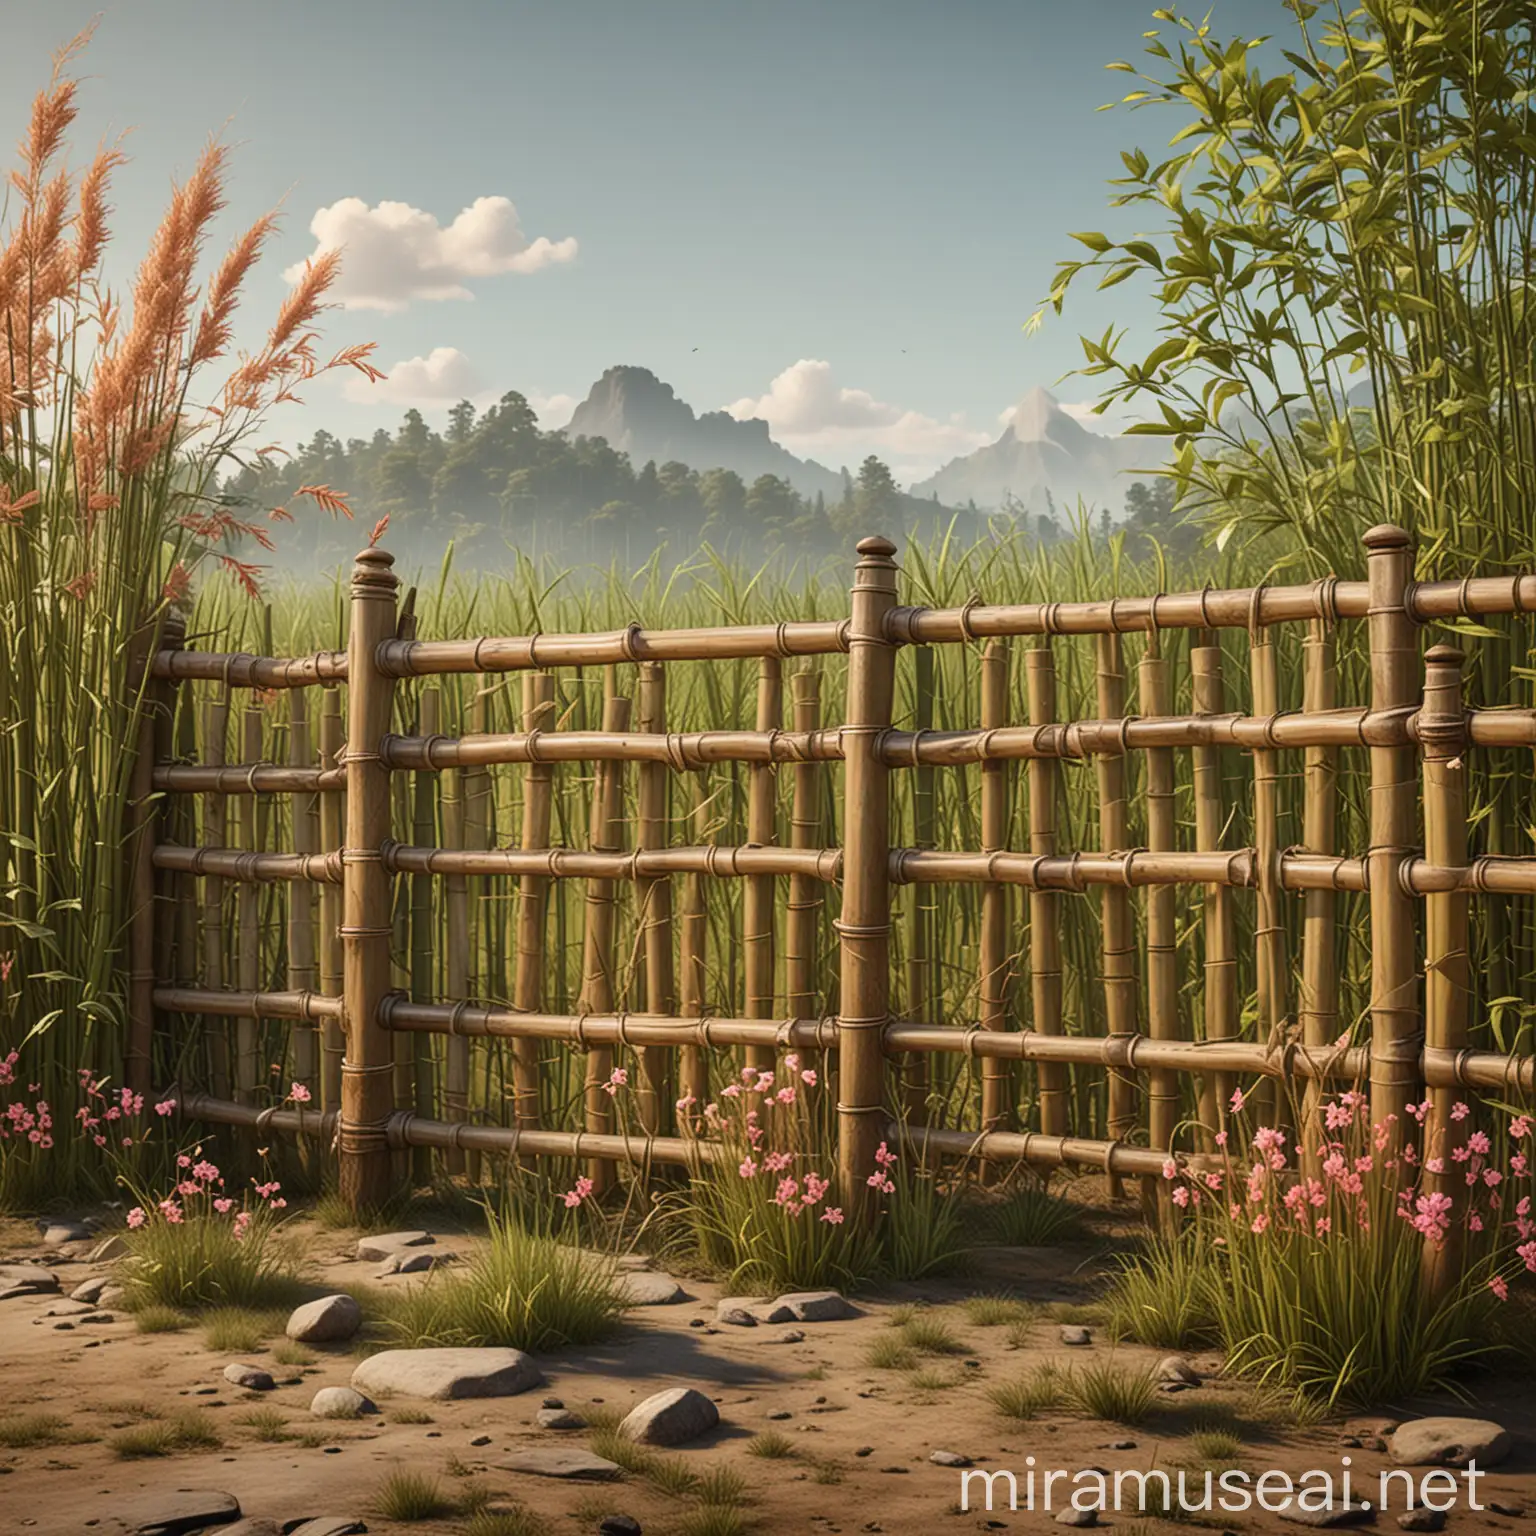 Create a detailed bamboo fence asset for a 2D game, inspired by the work of artist(s) Ivan Hoo, Rebecca Green, and Kyle T. Webster. The fence should be crafted from realistic bamboo with visible wire elements, designed to fit horizontally in a parallax view environment. The style should match the vibrant, pinkish-brown grass field and the overall aesthetic of the provided image. Display the fence on a 100% white background for easy integration. Ensure the design allows visibility through the fence to maintain the scenic background. --stylize 500 --quality 2 --chaos 20 --no background elements